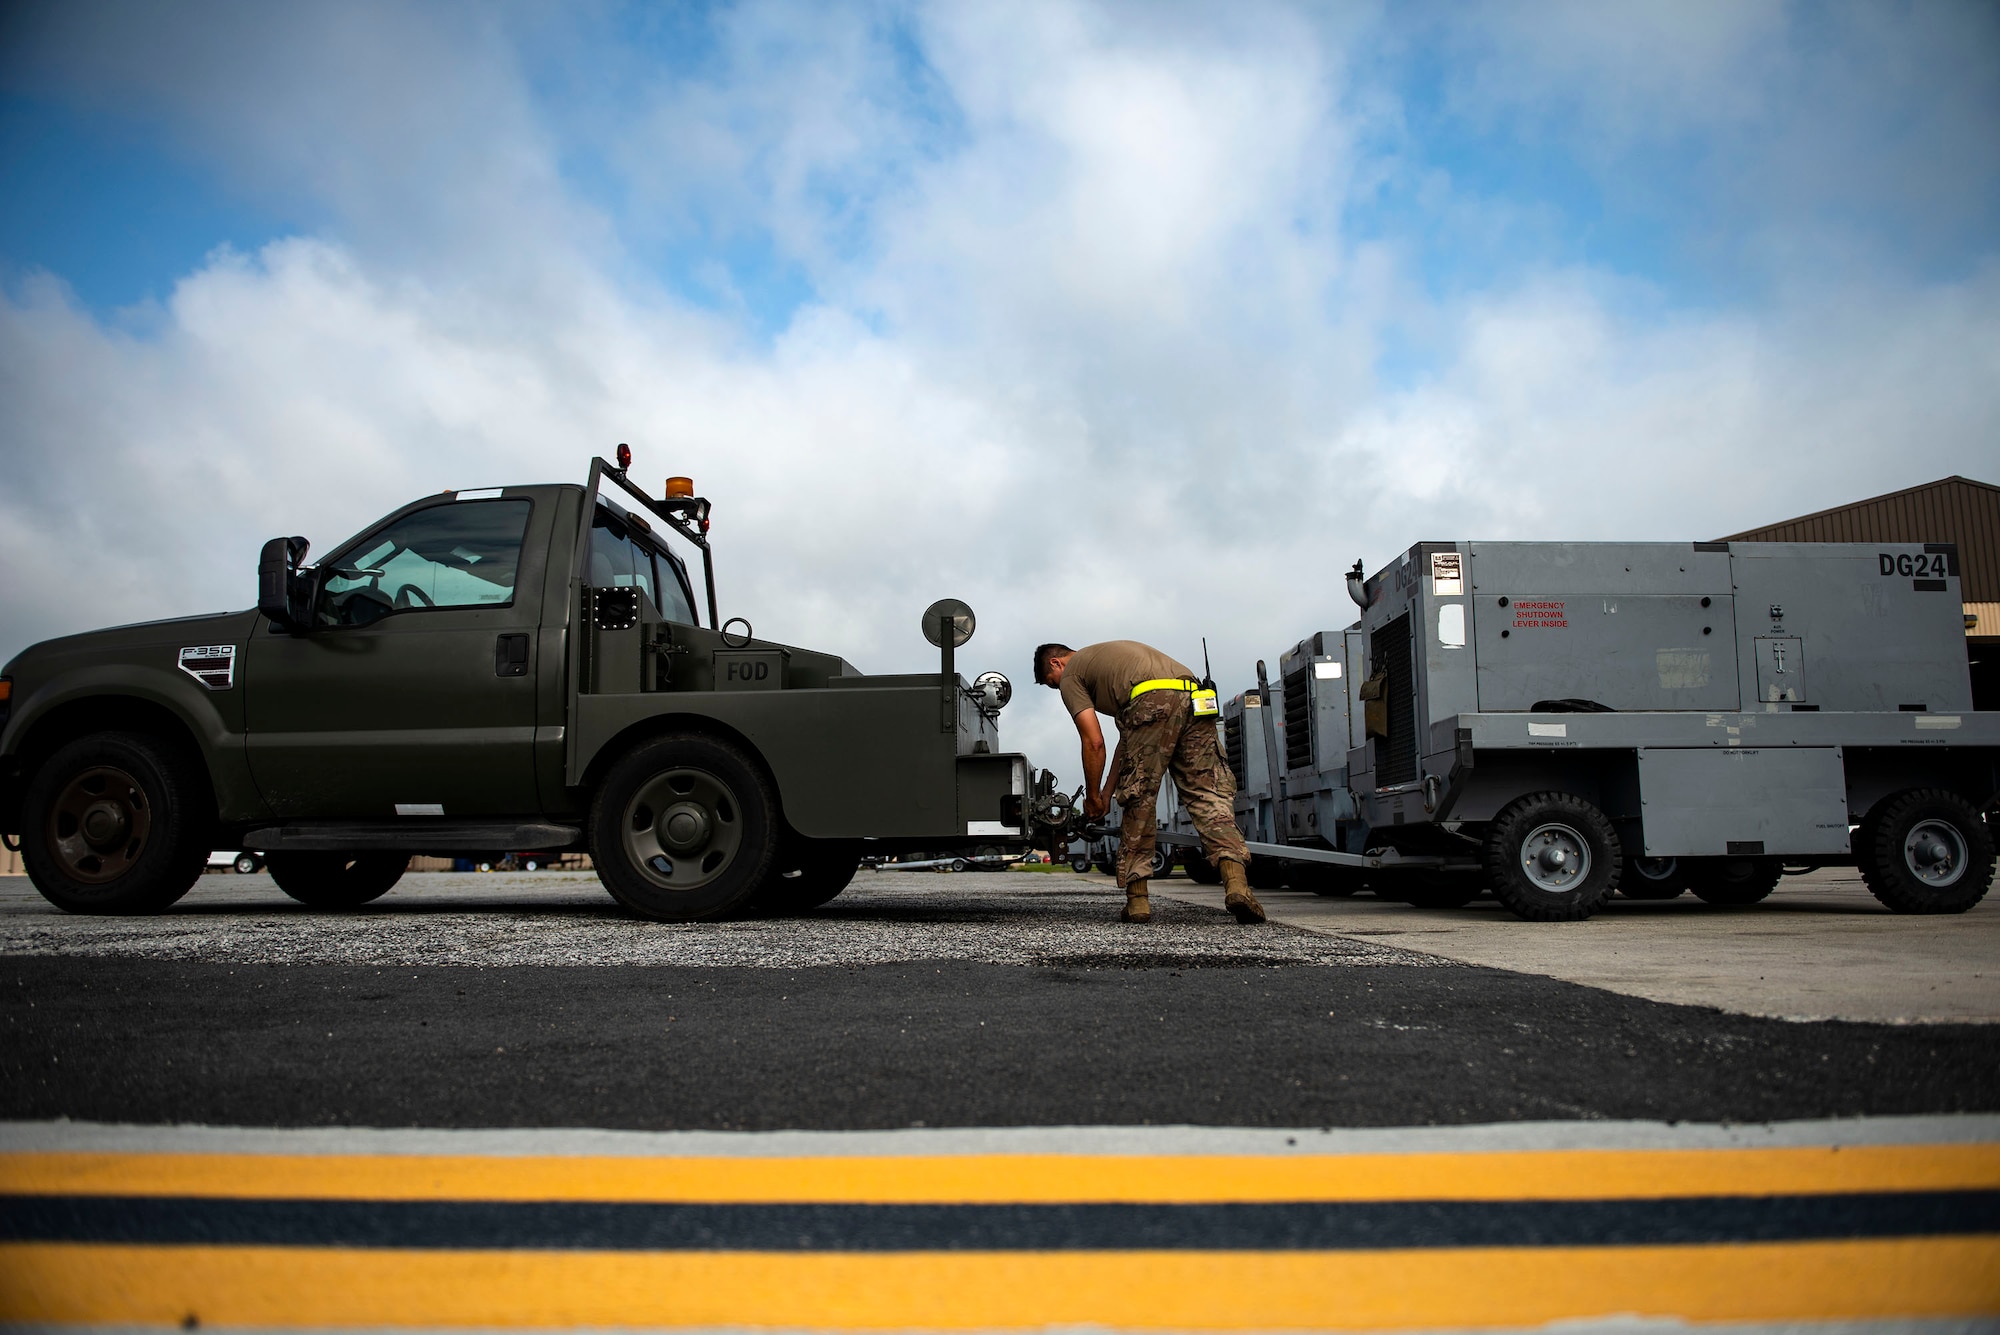 Senior Airman Brennan Hawk, 23d Maintenance Squadron aerospace ground equipment (AGE) journeyman, unhooks a generator during a dispatch, June 21, 2019, at Moody Air Force Base, Ga. AGE maintains the equipment needed to repair the three airframes in the 23d Wing. To accomplish this, AGE is broken down into three main functions: inspections, maintenance and dispatch. The dispatch section supports the movement of approximately 500 pieces of equipment, from hydraulic-test stands to generators and from axel jacks to air conditioners. AGE accumulates more than 1,300 hours of dispatches per month. (U.S. Air Force photo by Senior Airman Erick Requadt)